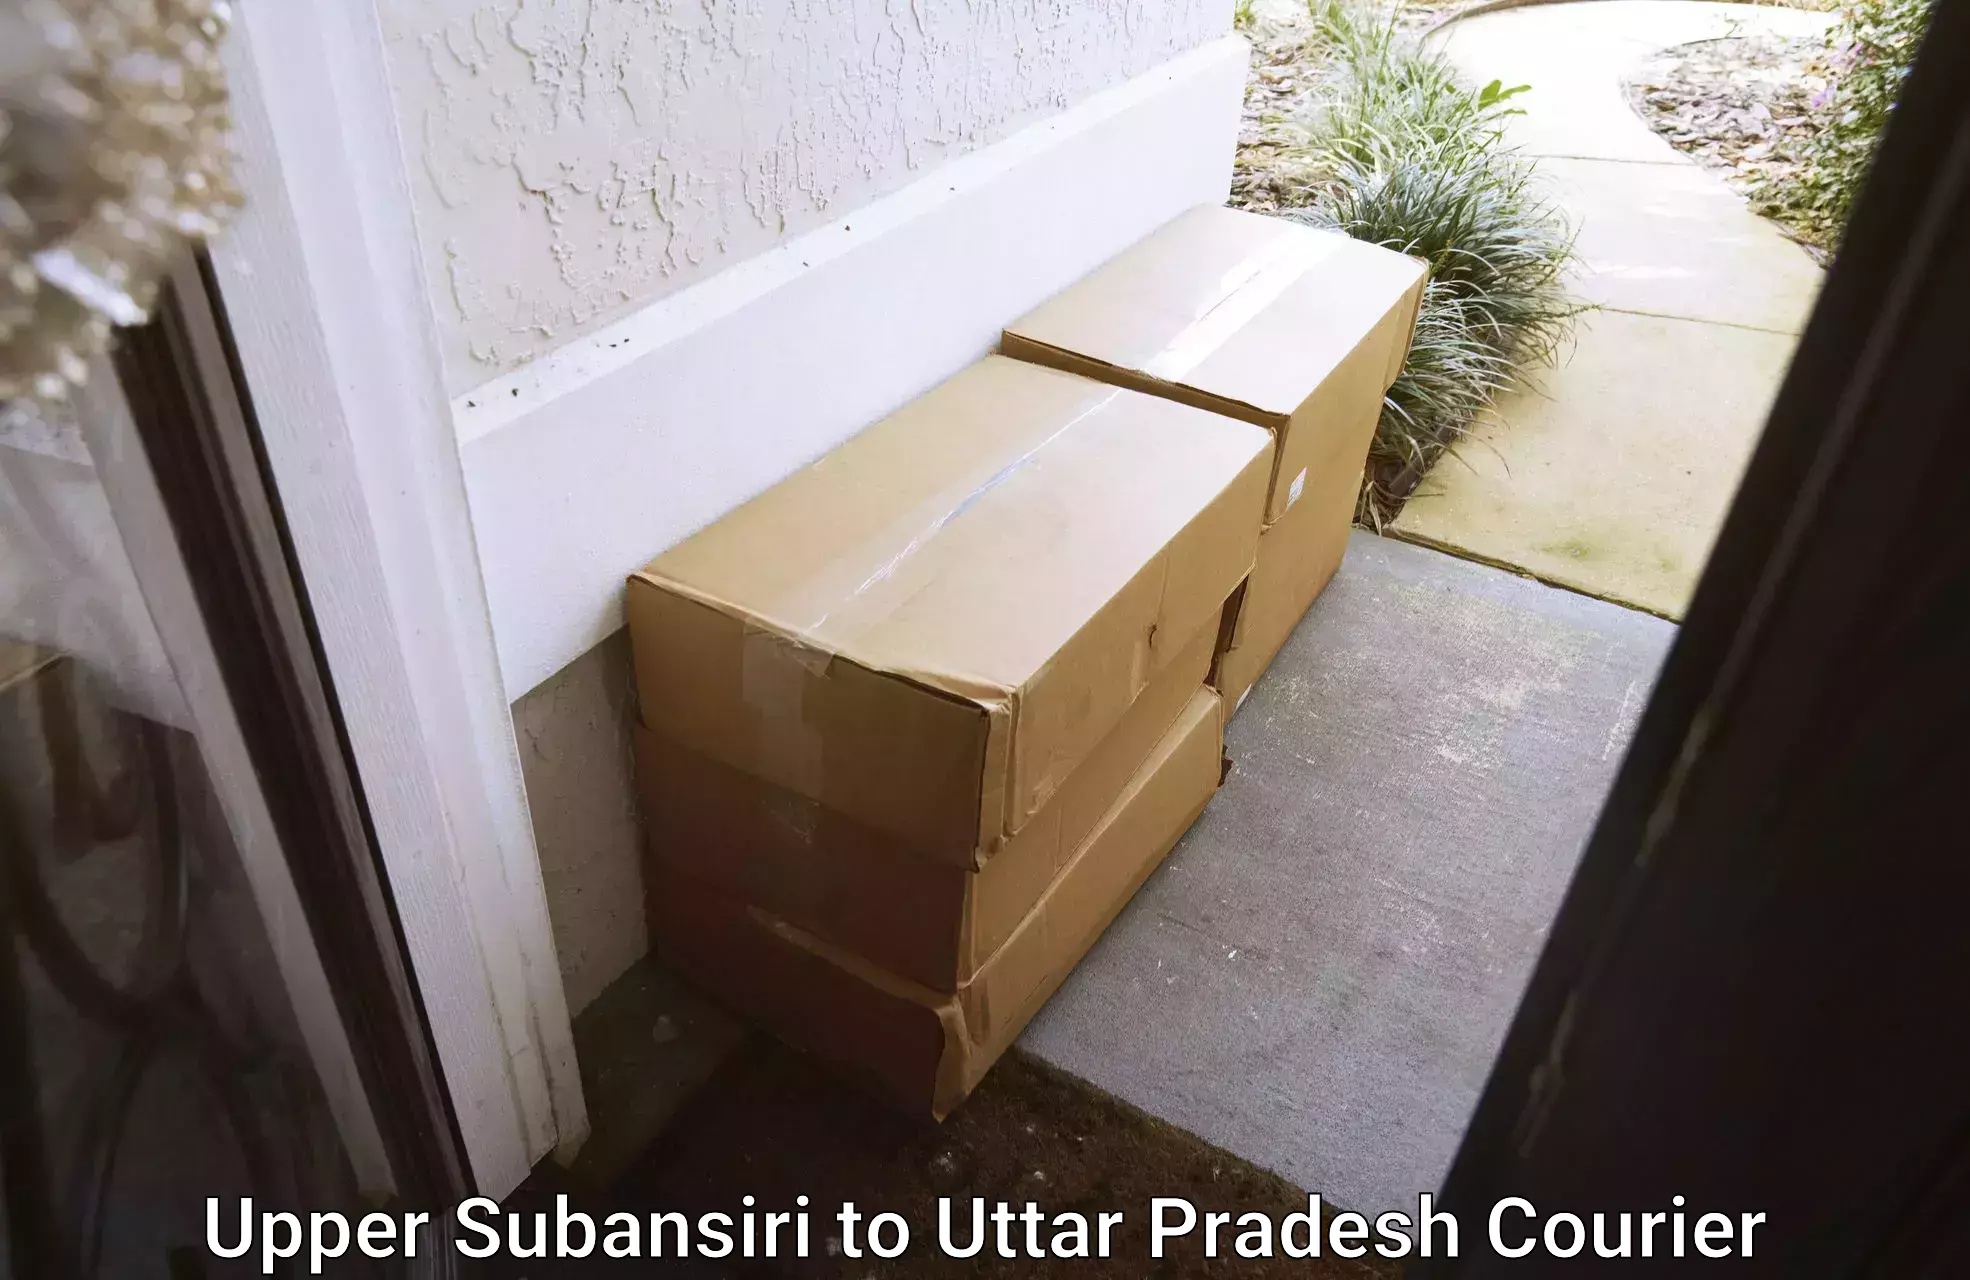 Multi-service courier options in Upper Subansiri to Khalilabad